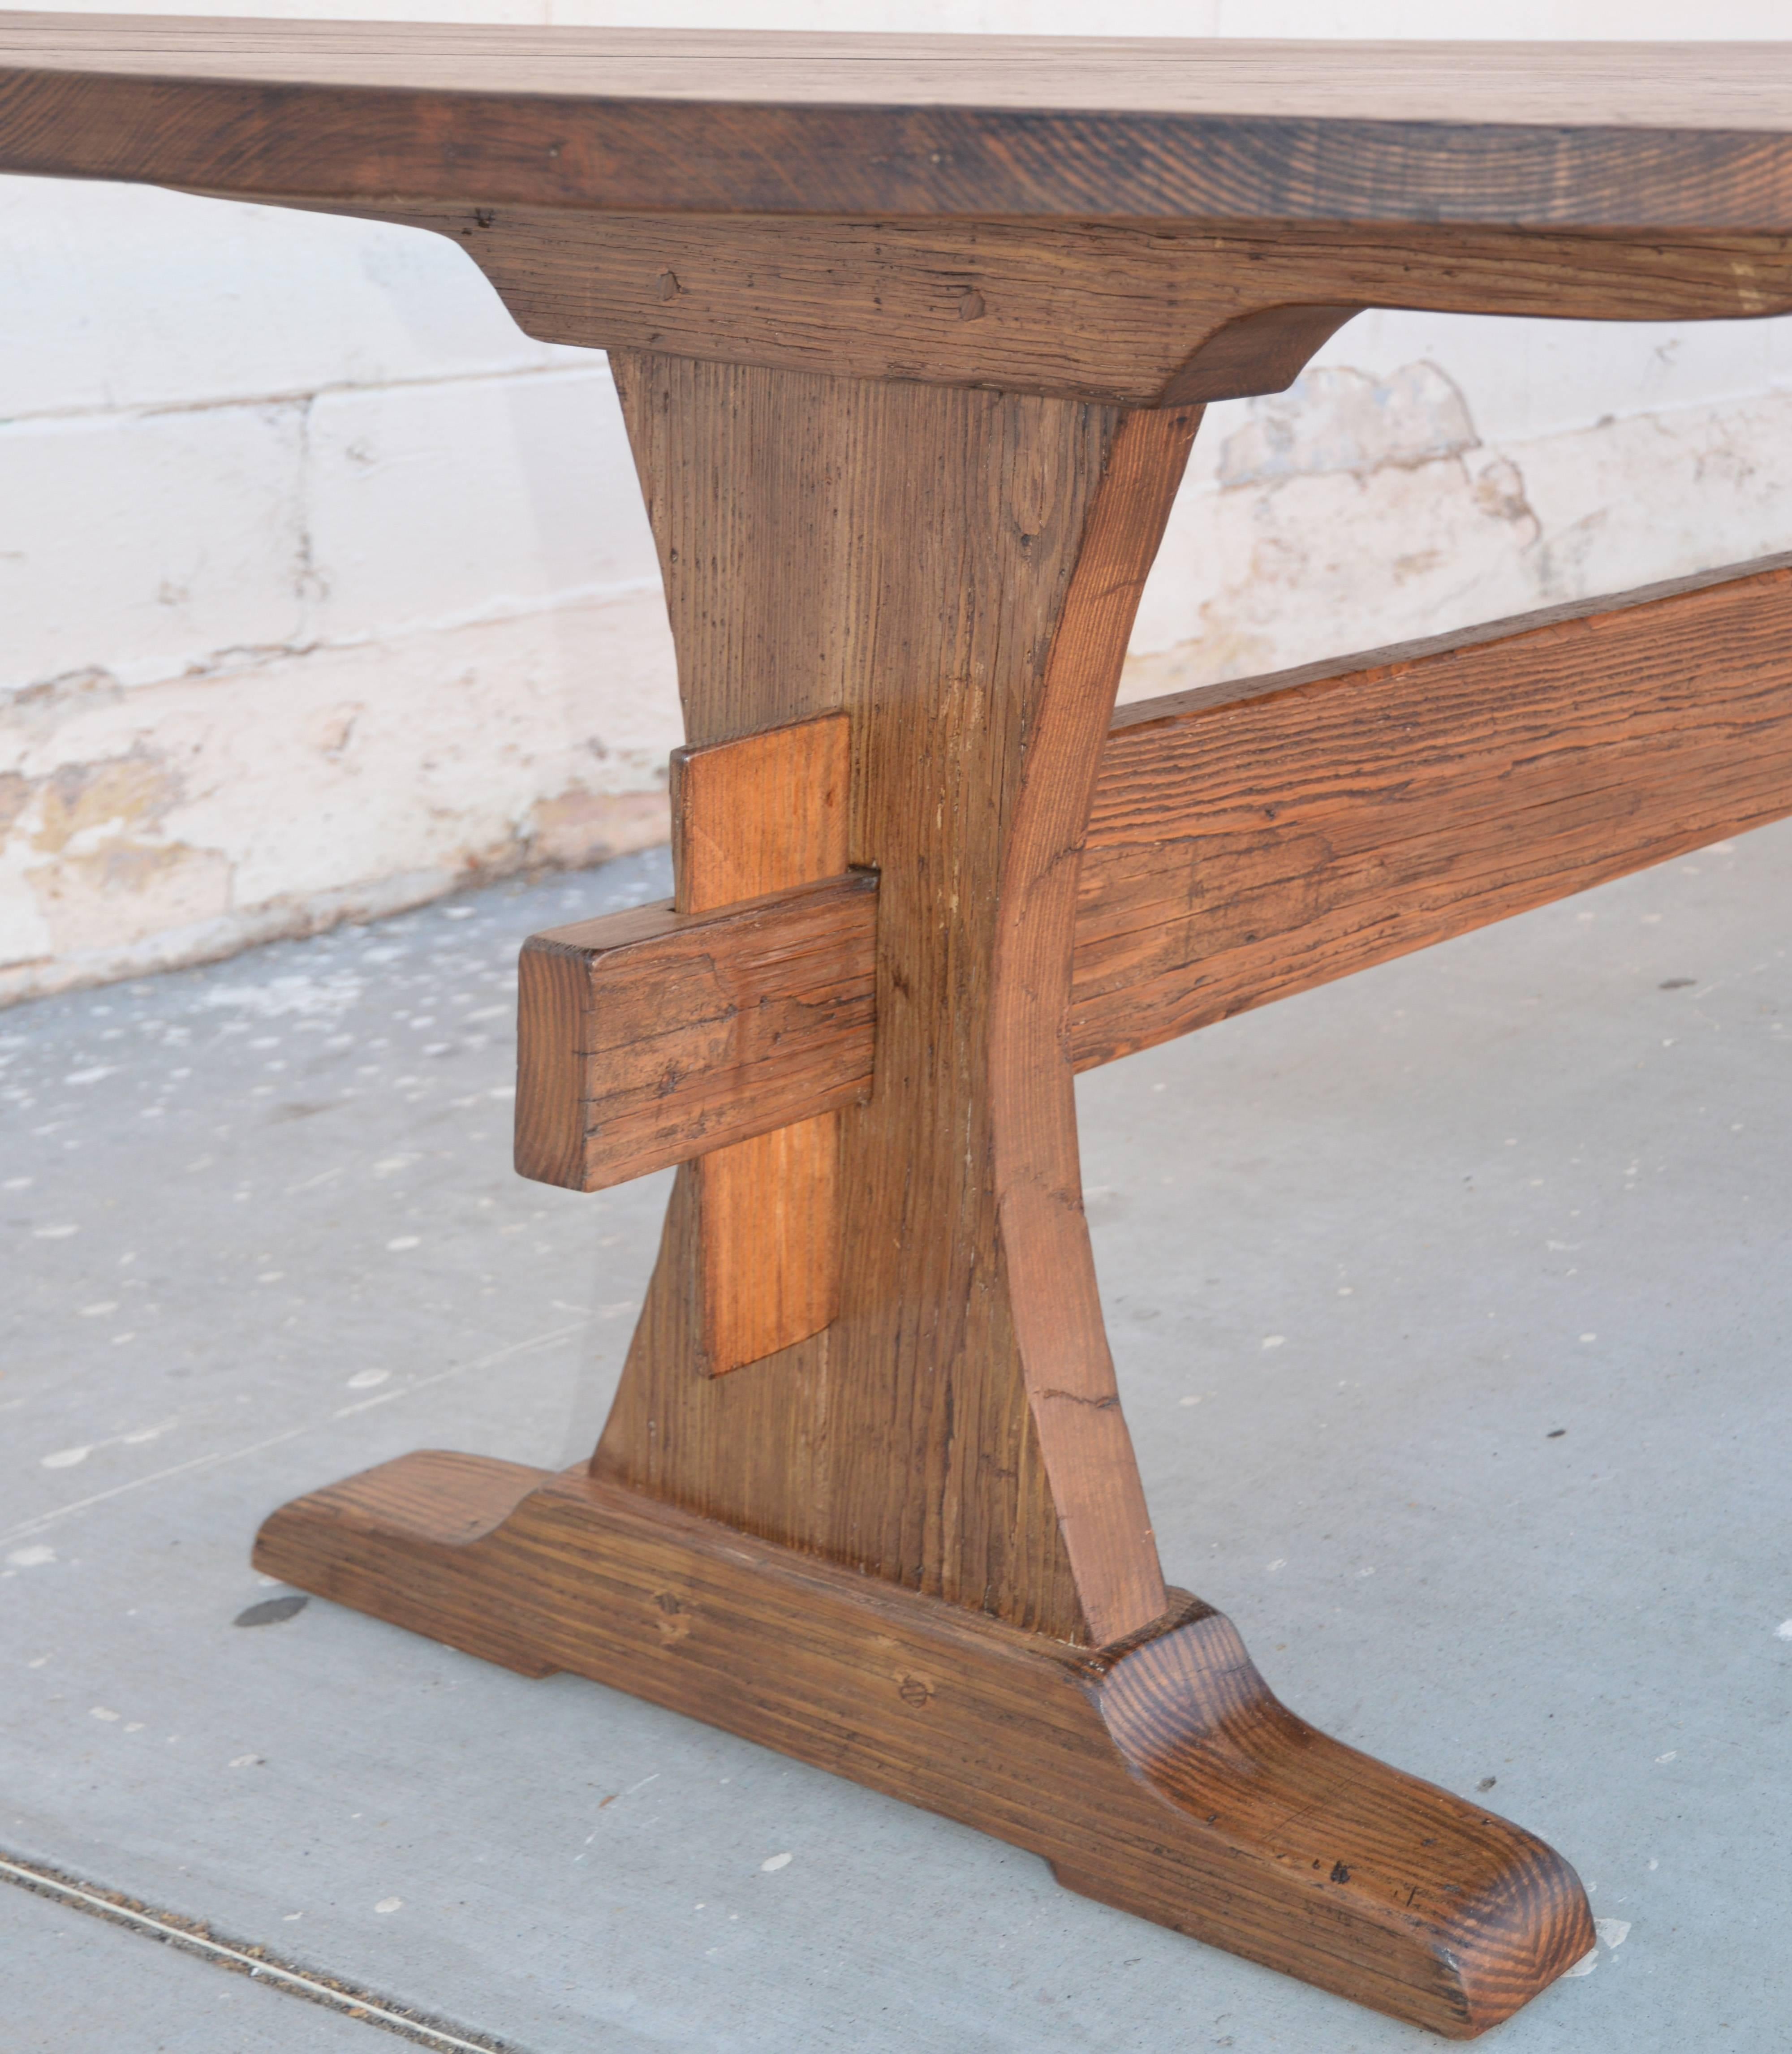 Hand-Crafted Custom Farm Table in Reclaimed Heart-Pine, Built to Order For Sale